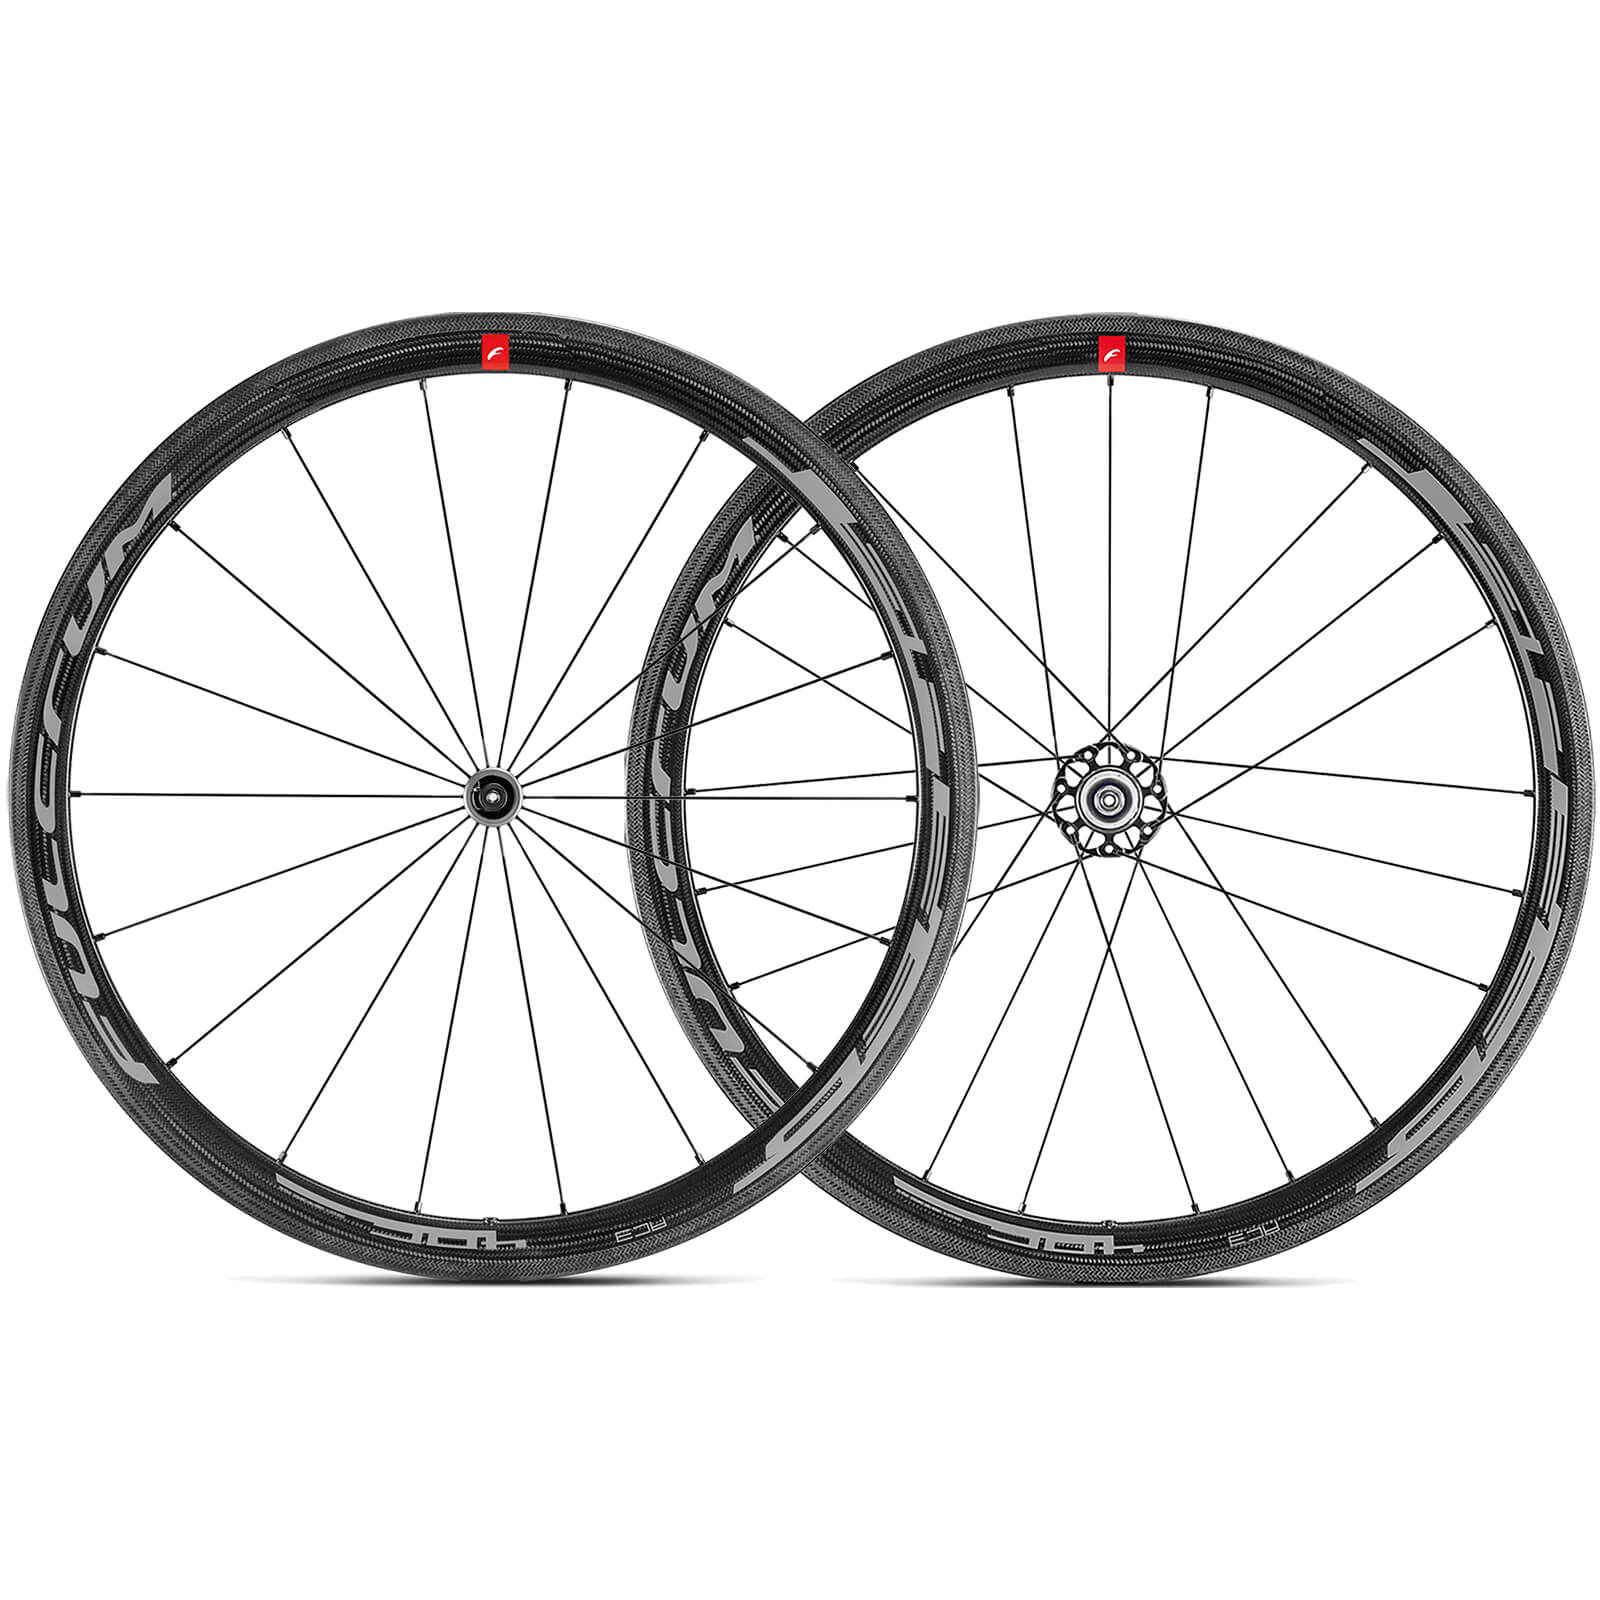 Image of Fulcrum Racing Speed 40C C17 Carbon Clincher Road Wheelset - Black / Shimano / Pair / 11 Speed / Clincher / 700c